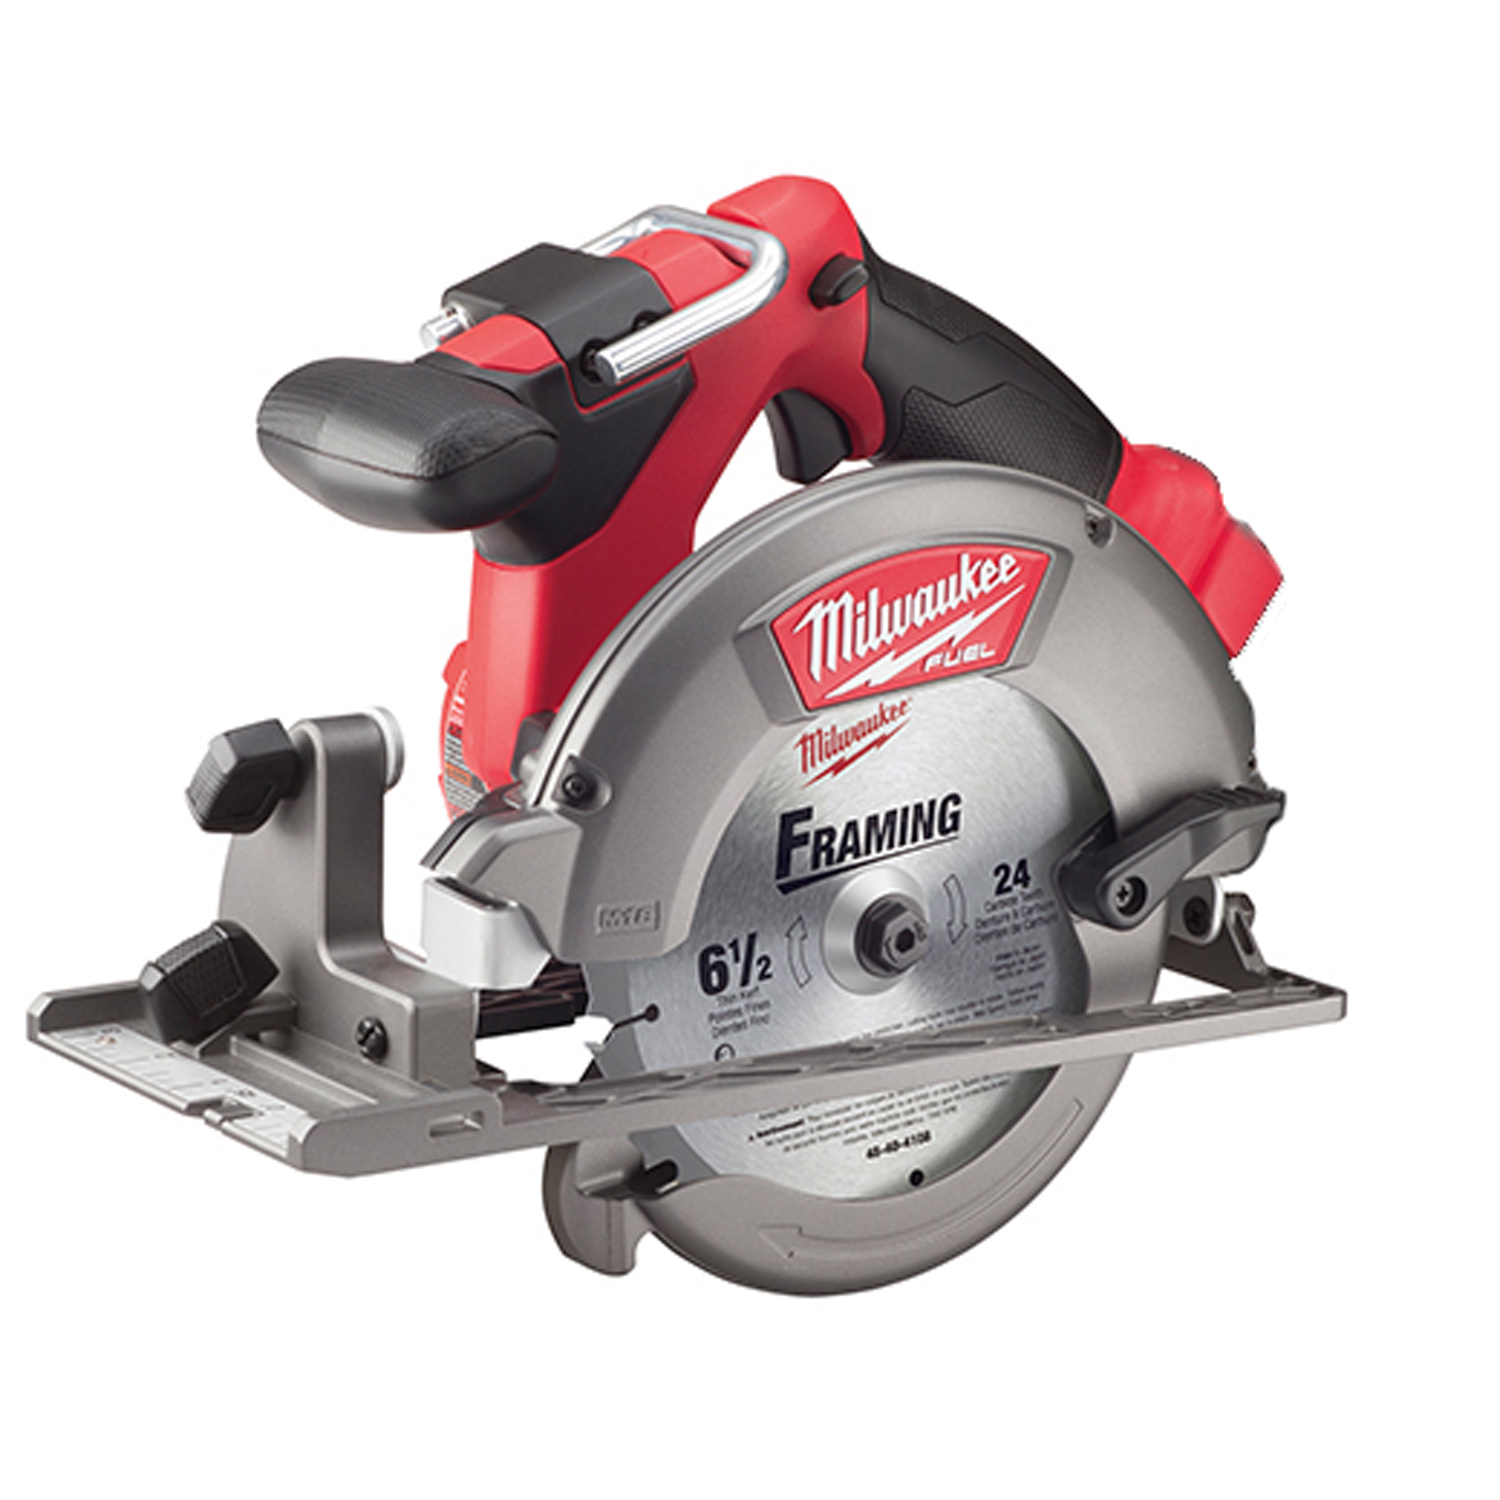 M18 FUEL 18 Volt Lithium-Ion Cordless 6-1/2 in. Circular Saw - Tool Only